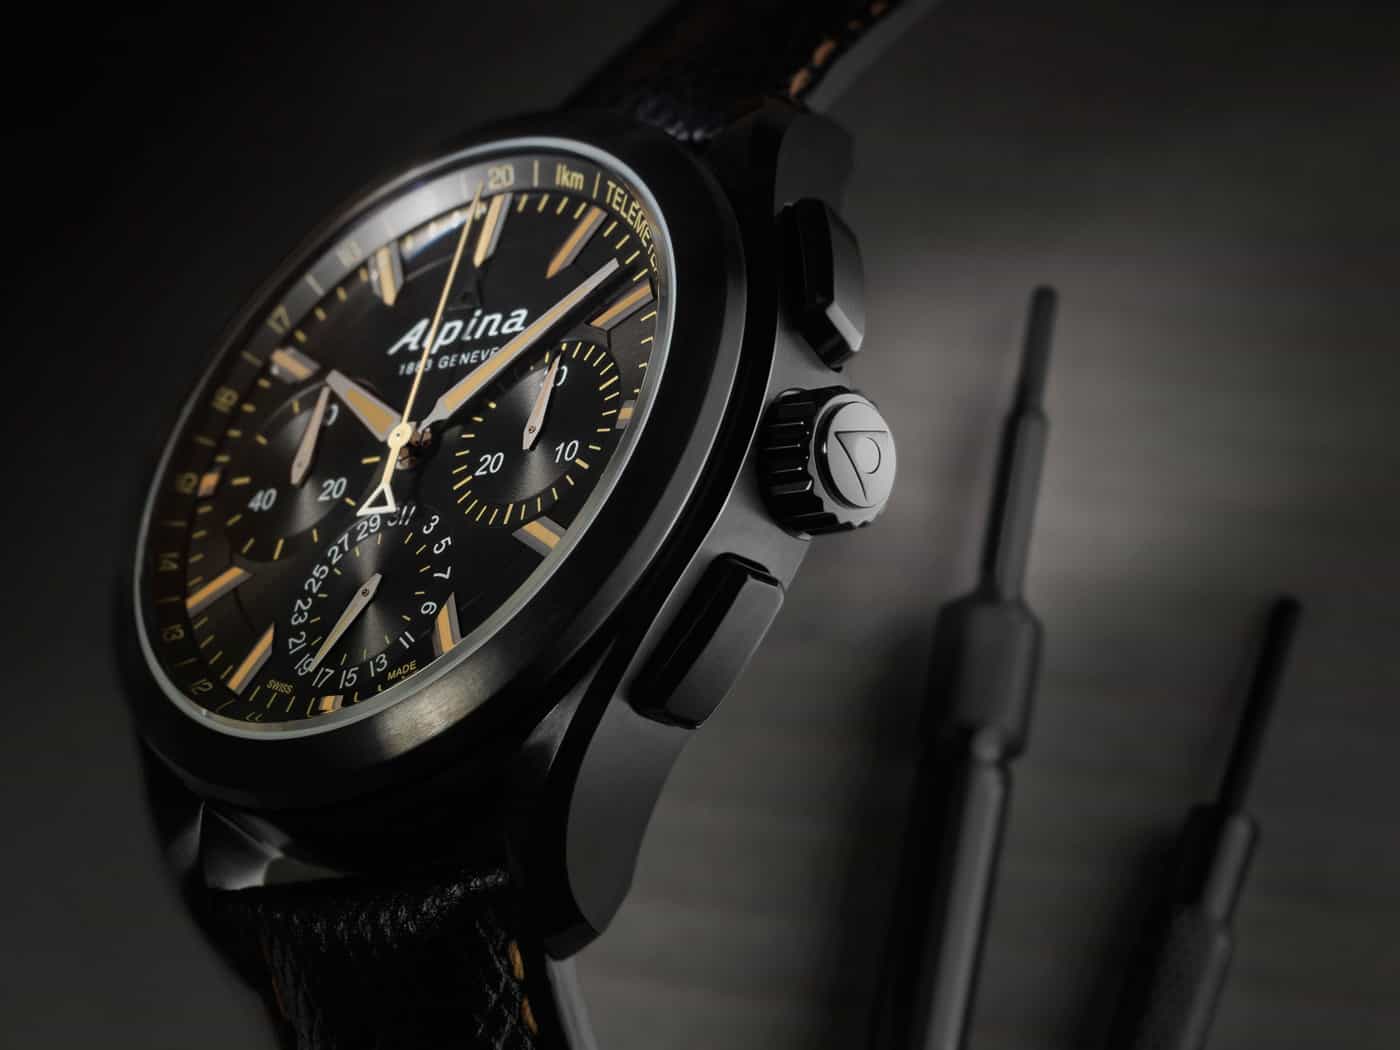 The “Full Black” Alpiner 4 Manufacture Flyback Chronograph